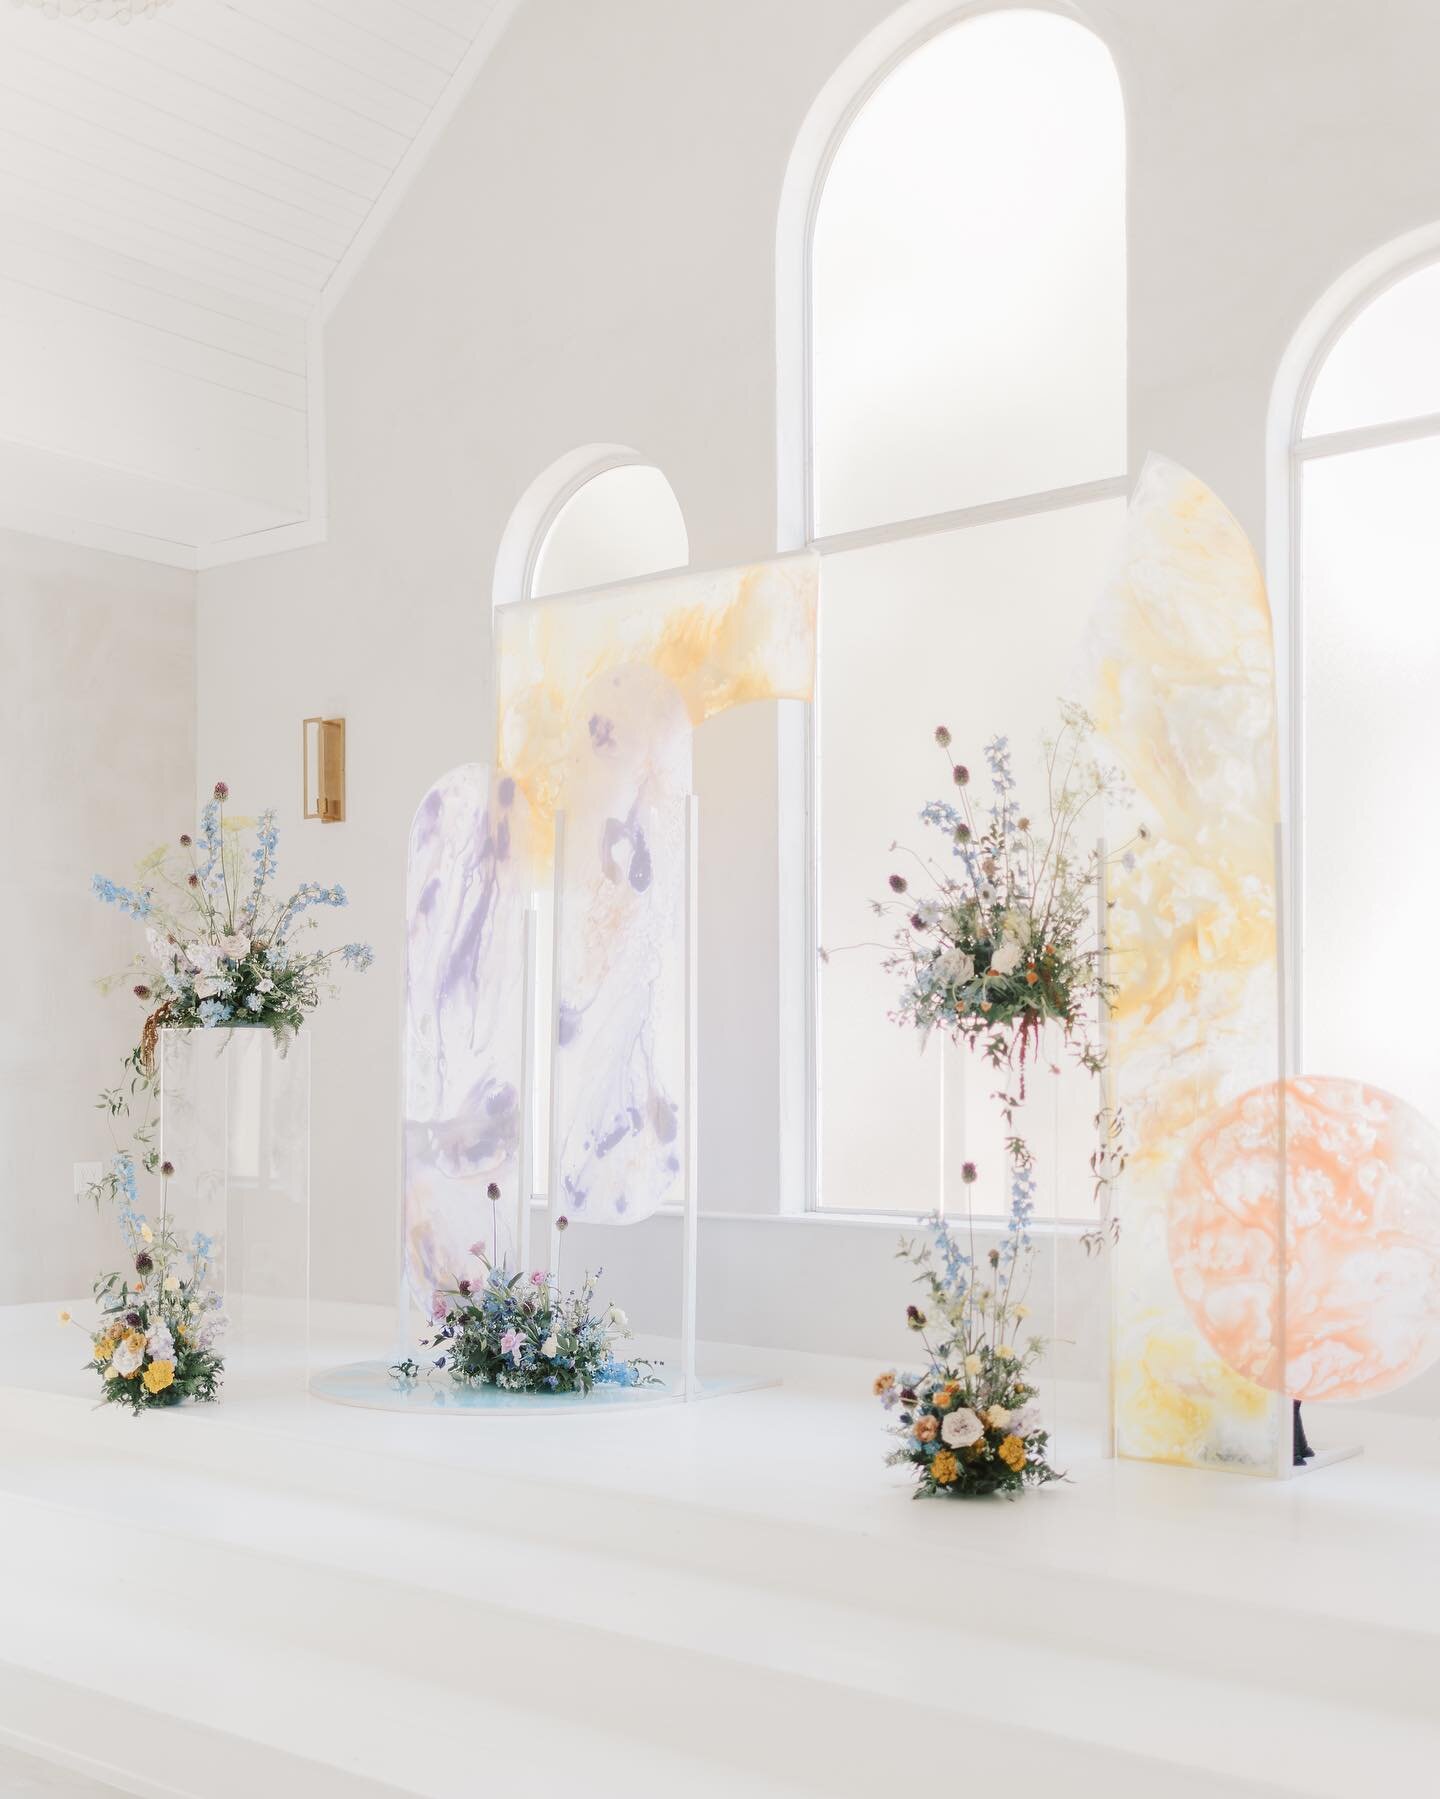 Custom hand dyed, watercolor plexiglass ceremony backdrop.

Design + Planning: @honeyandco.weddings 
Venue: @emersonvenue 
Photo: @mochiesnyder 
Video: @lexichasemedia 
Floral: @olivegrovedesign 
Ceremony Install: @vim.and.venture 
Signage: @eastrose